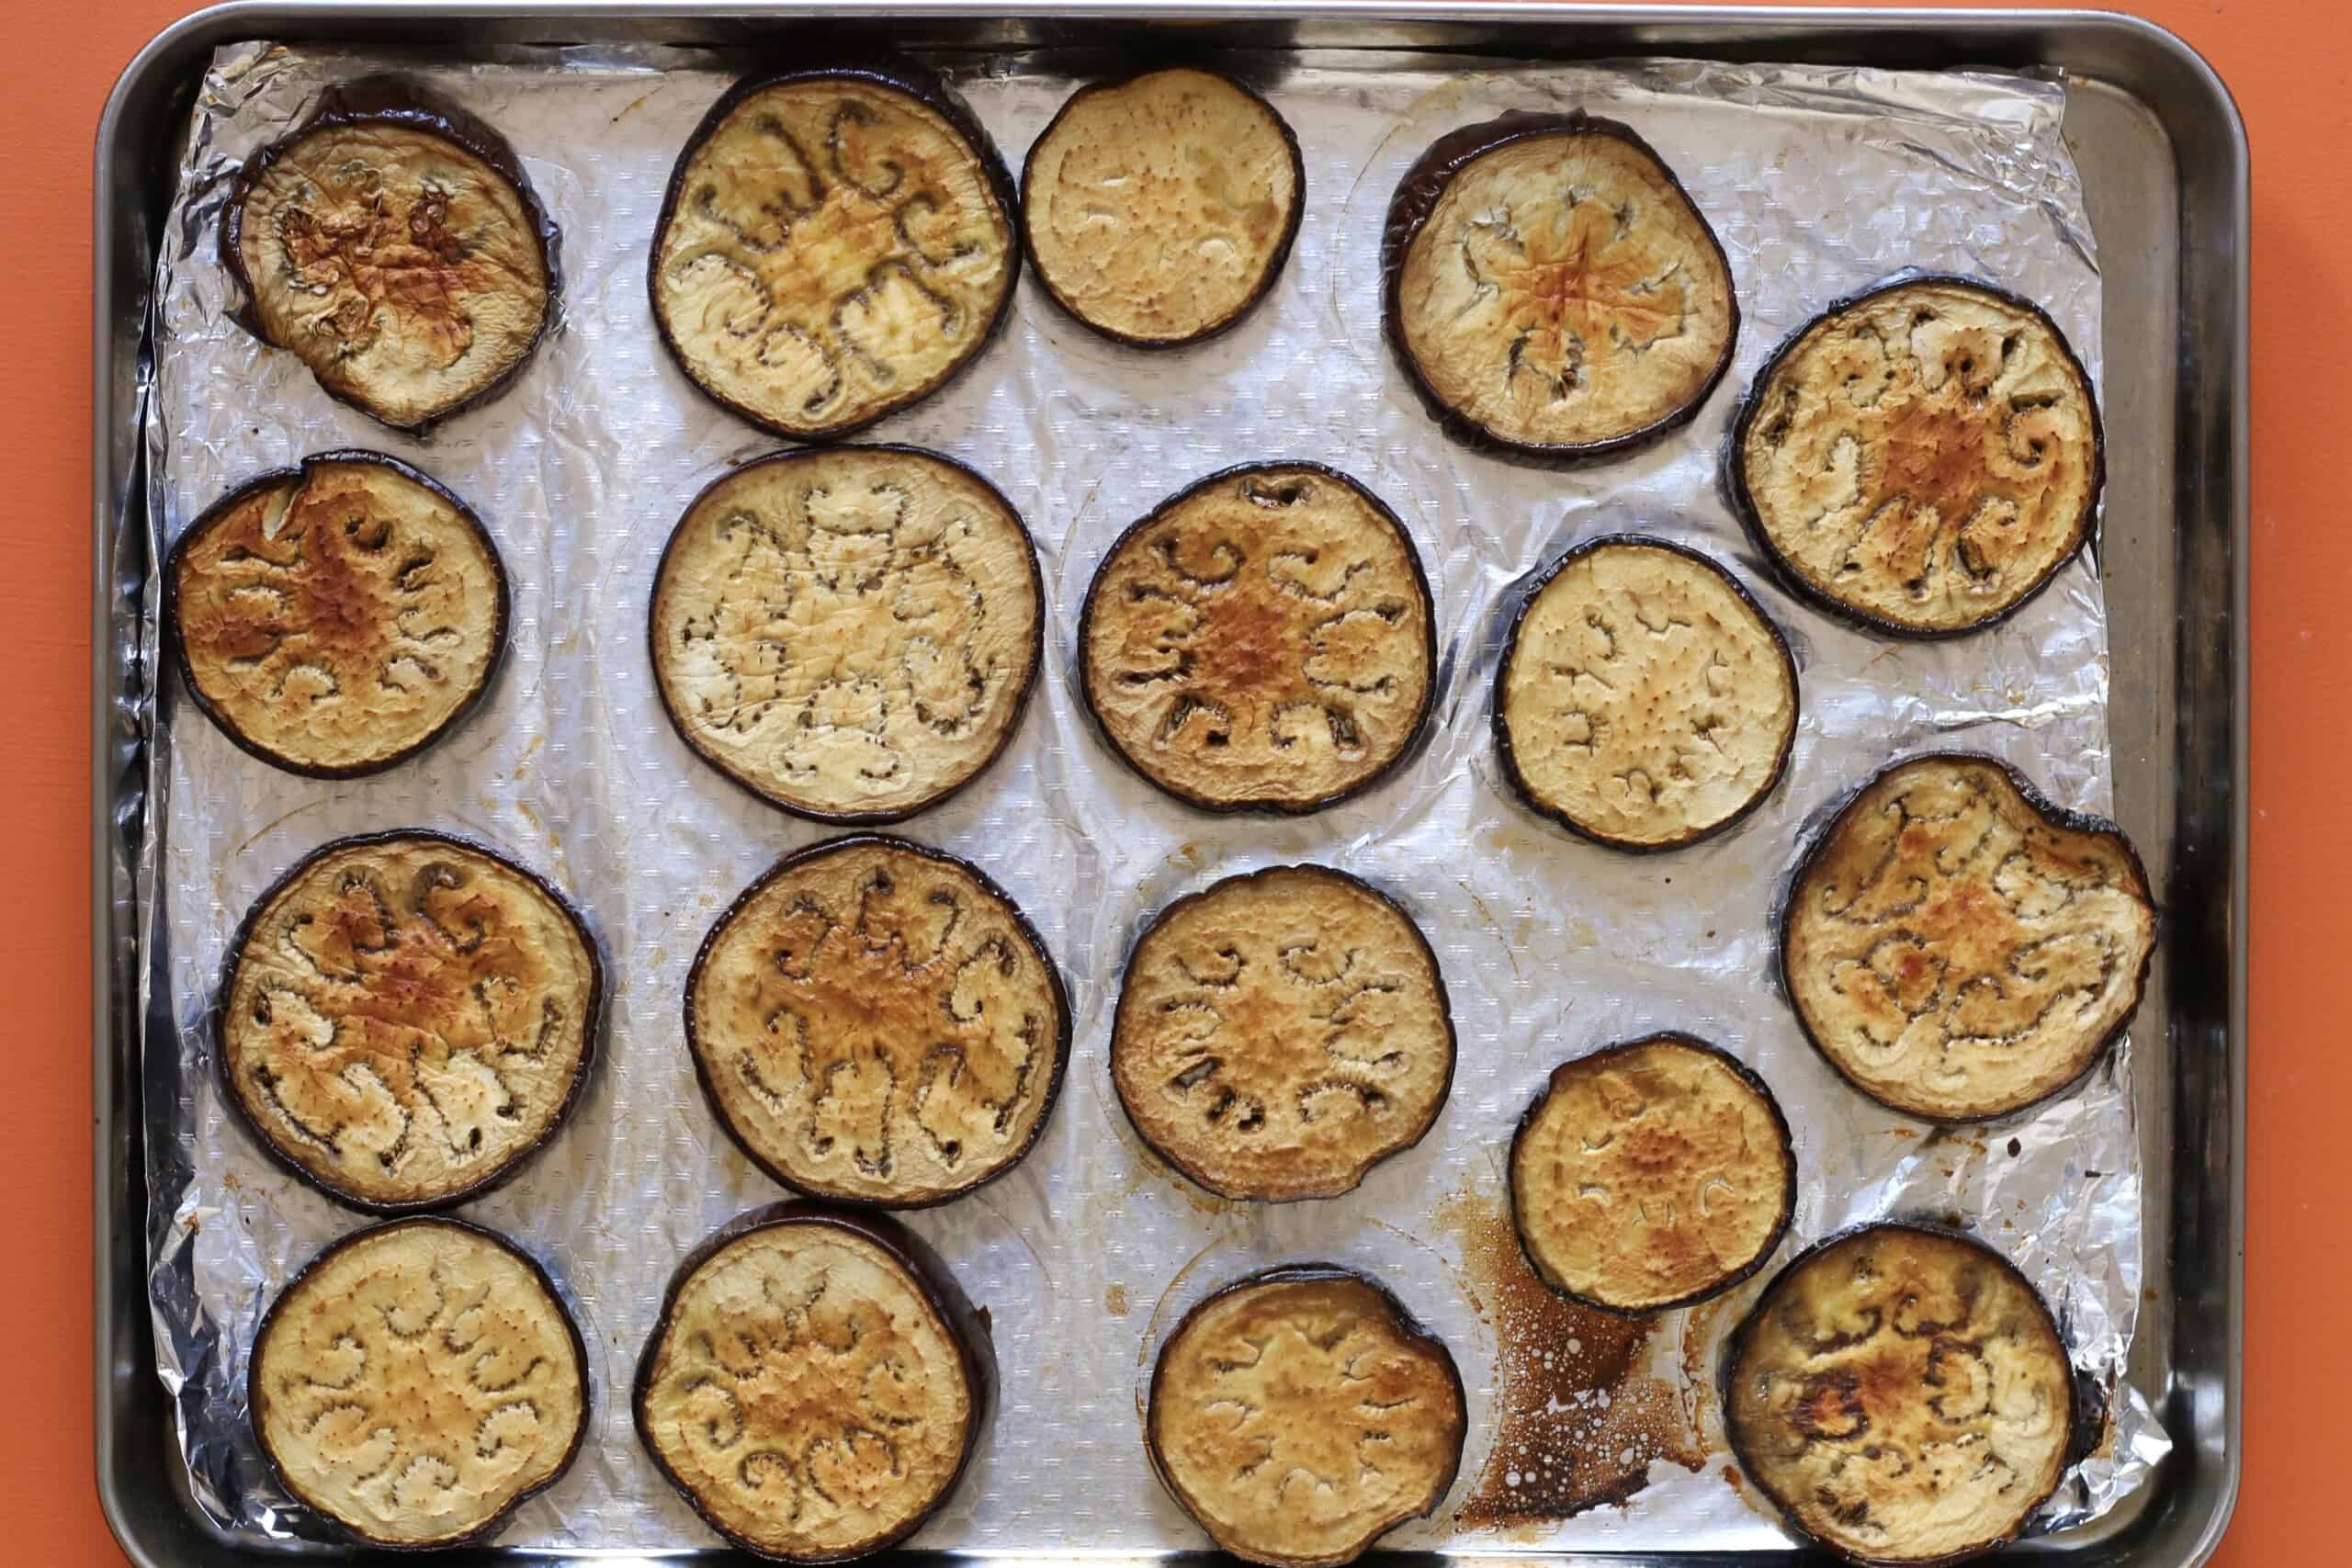 Roasted aubergines rounds on a foil lined baking tray.